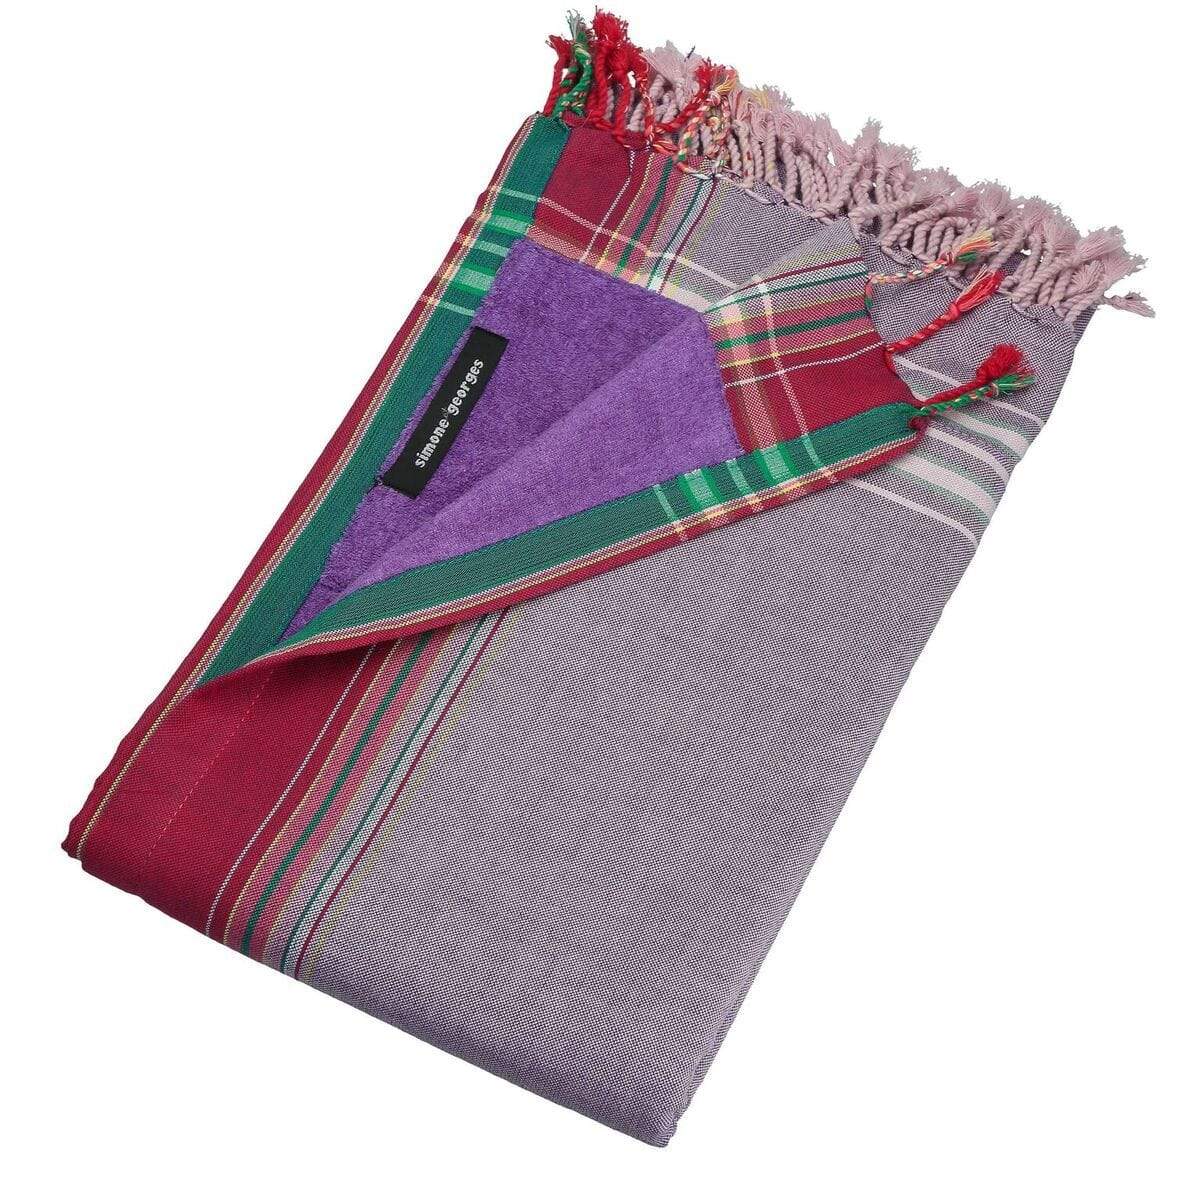 HomeRoots Outdoors Home Decor > Throws Purple / Cotton, Towel, Polyester 0.82" X 1.31" X 0.07" Kir Cassis Cotton, Polyester Kikoy-Towel